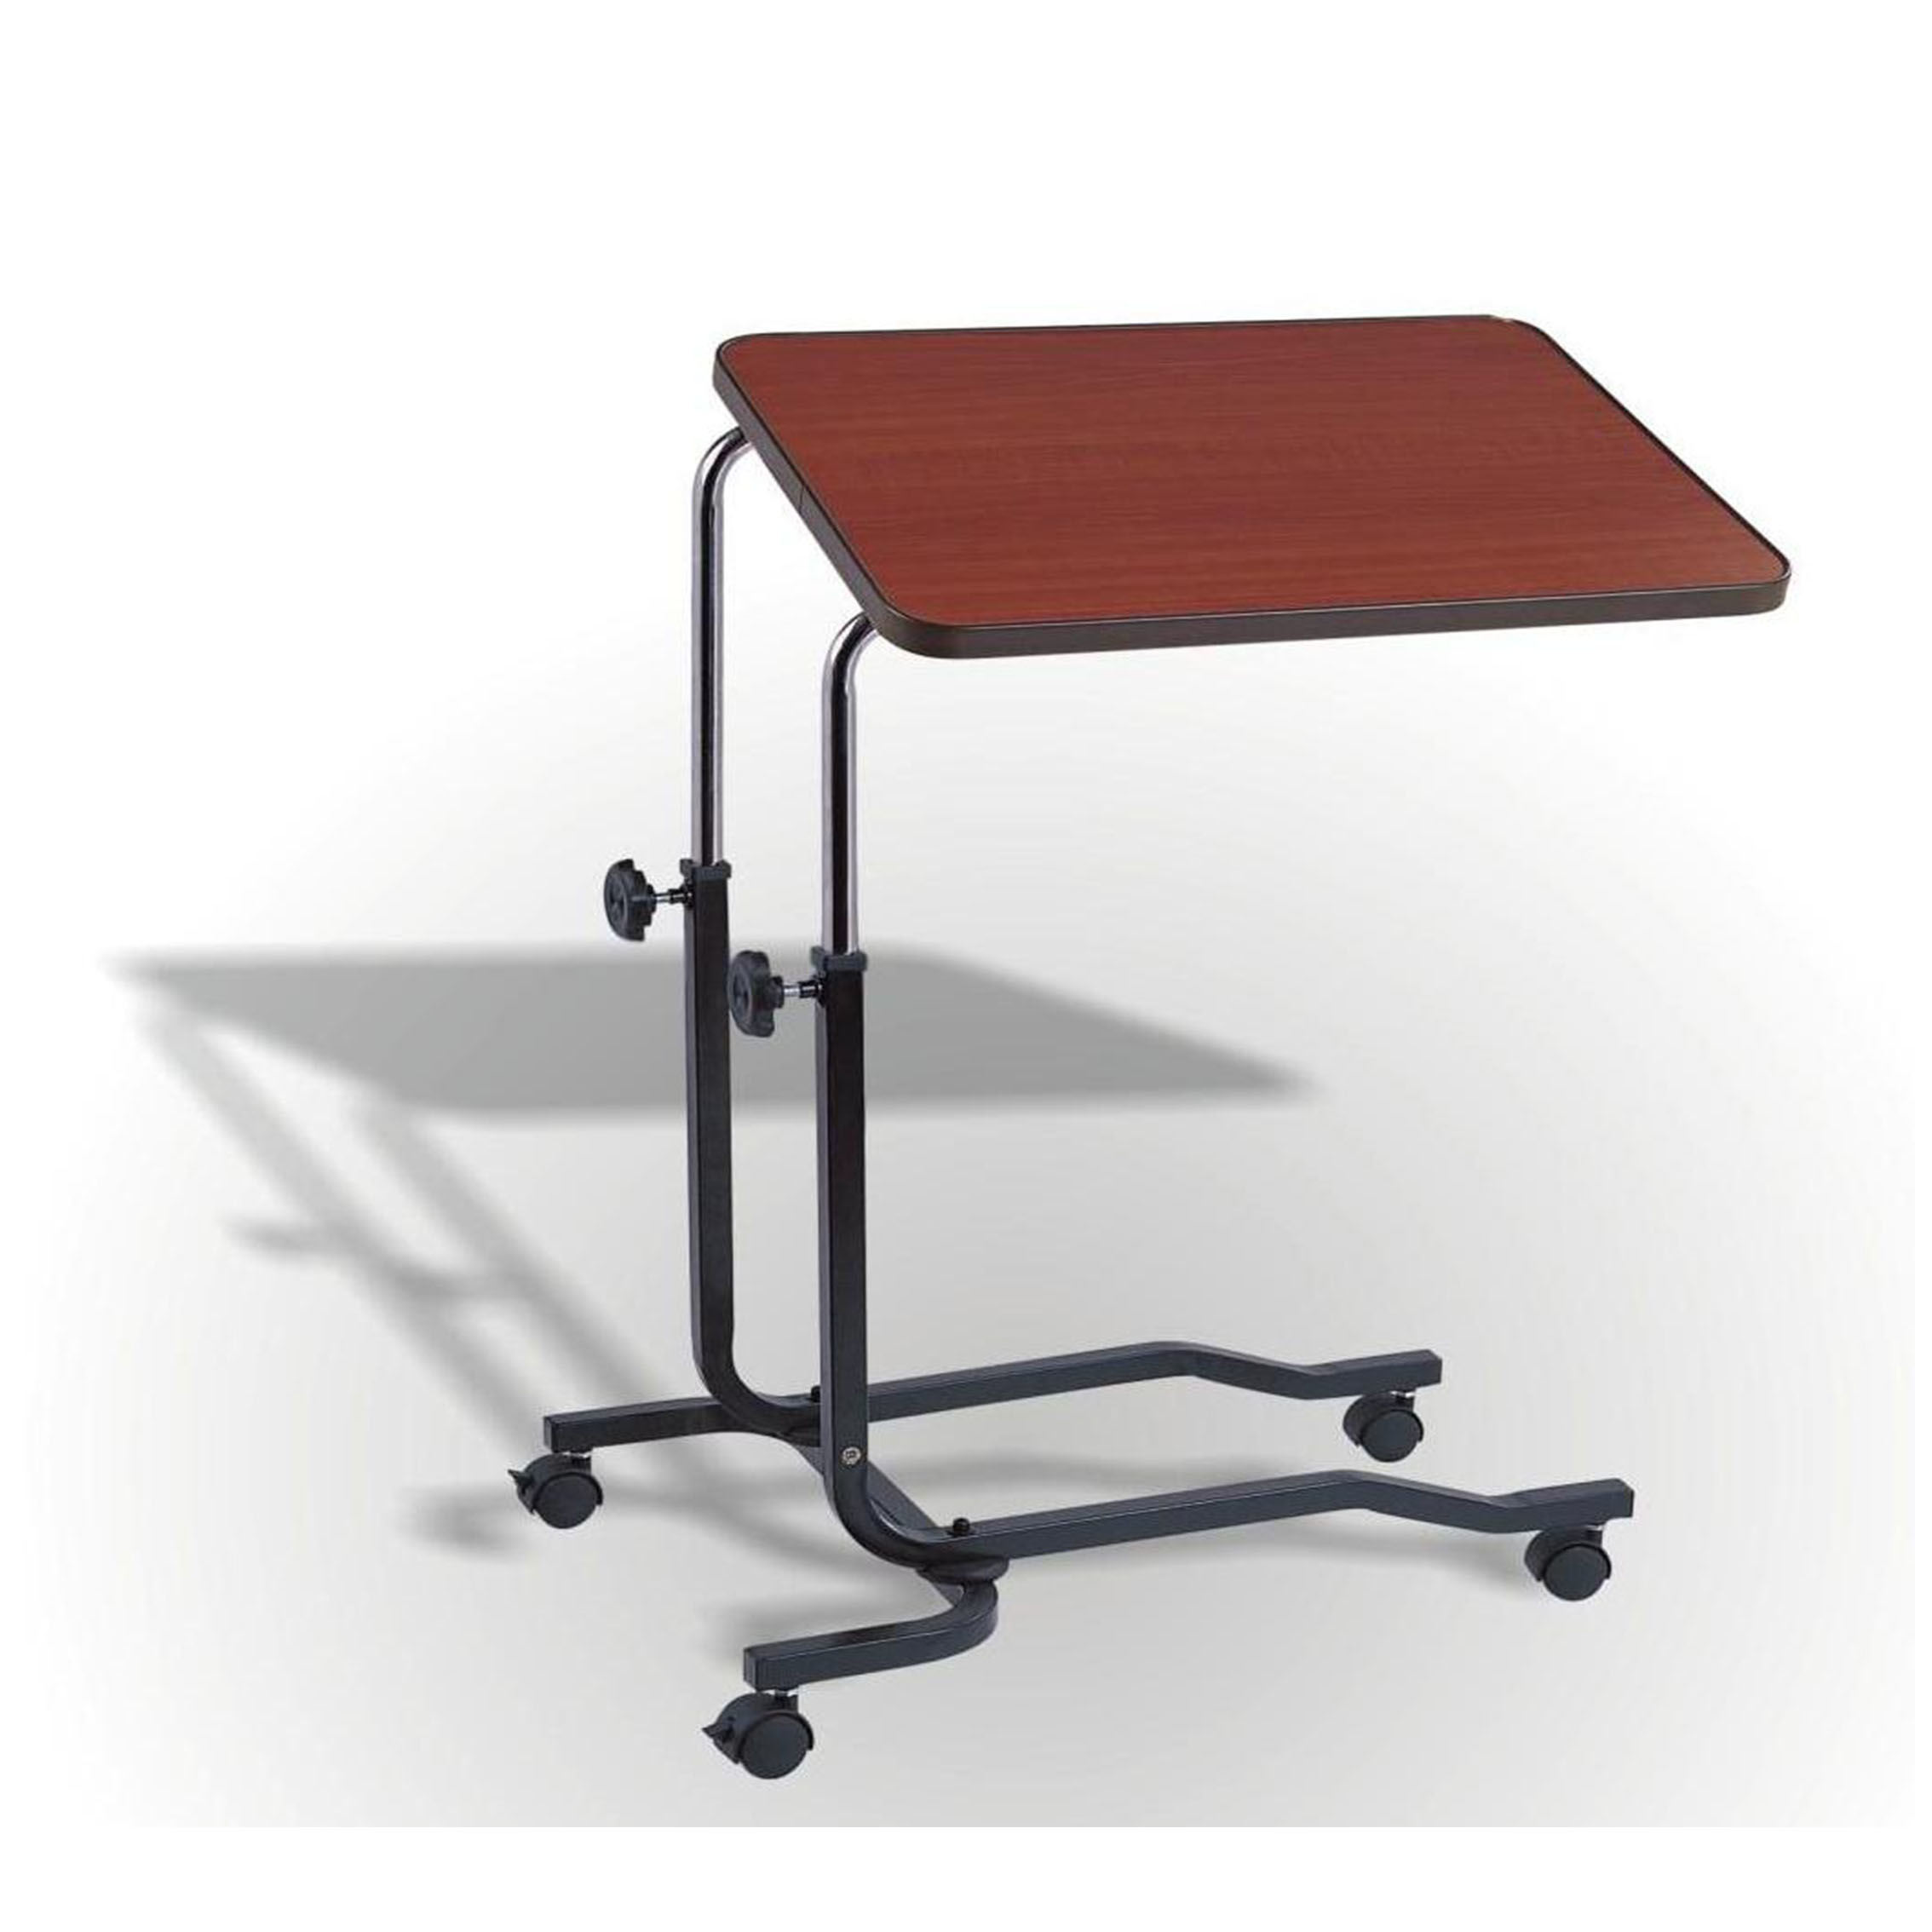 Overbed table overchair table